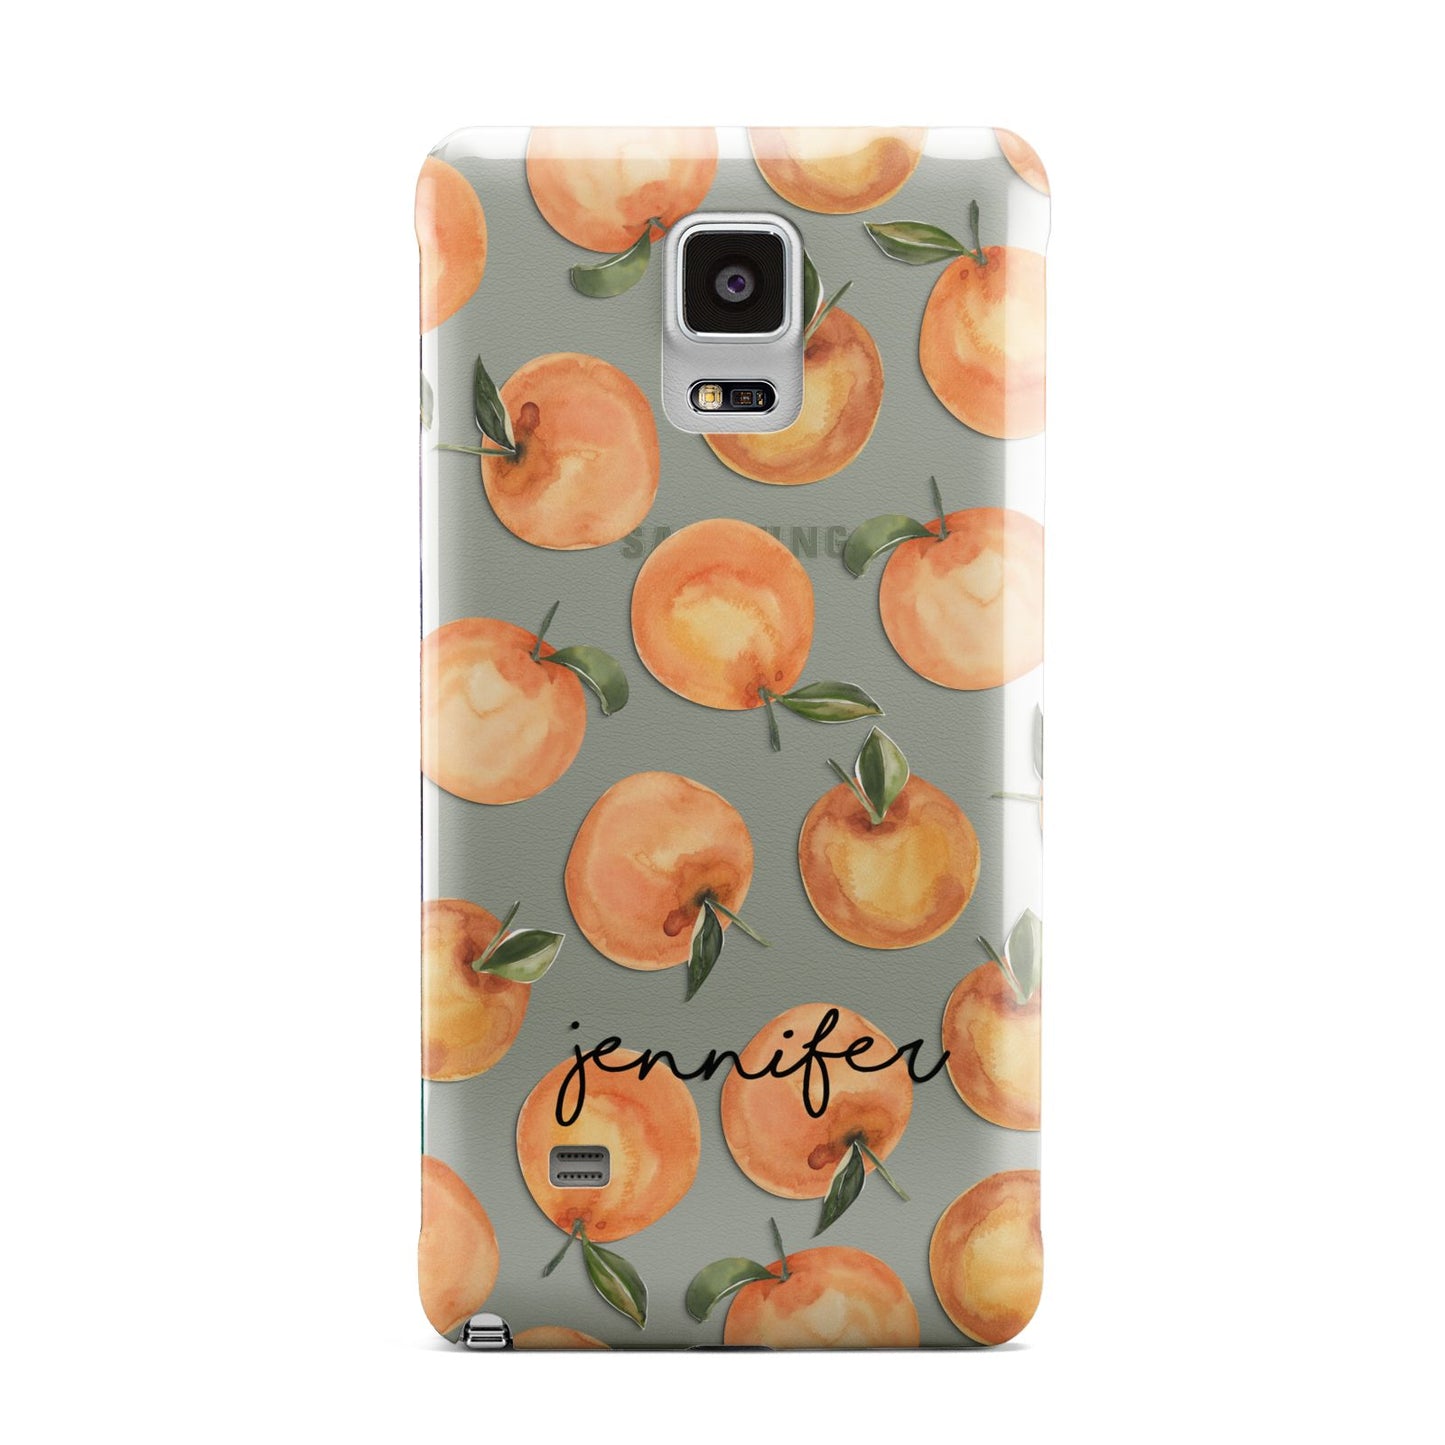 Personalised Oranges Name Samsung Galaxy Note 4 Case